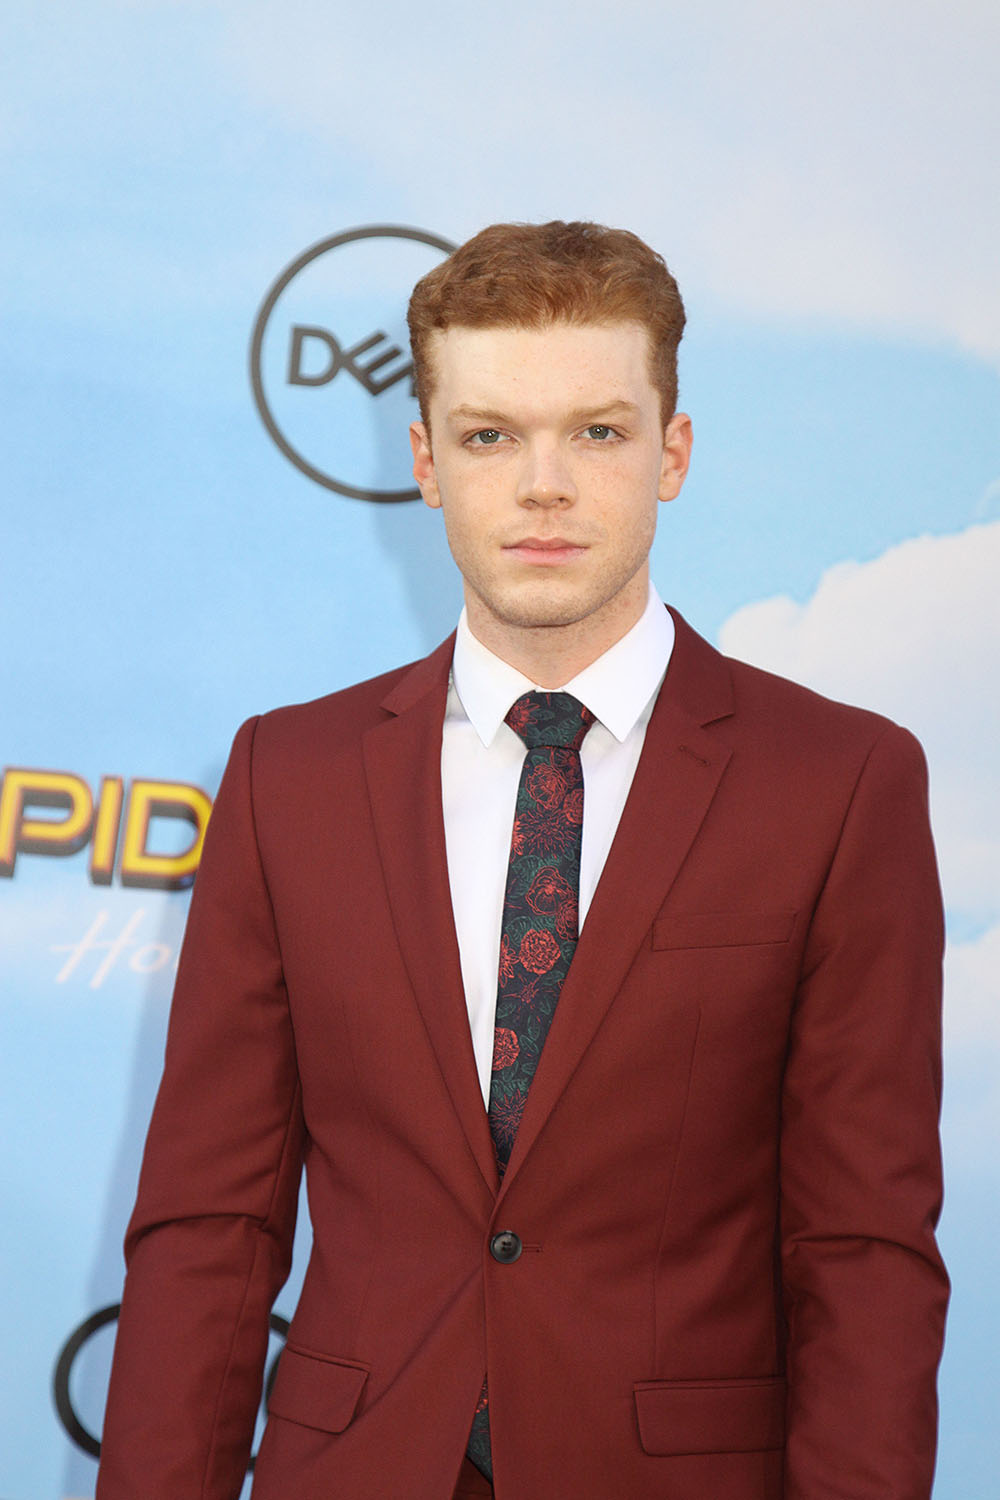 Cameron Monaghan Assignment X Assignment X